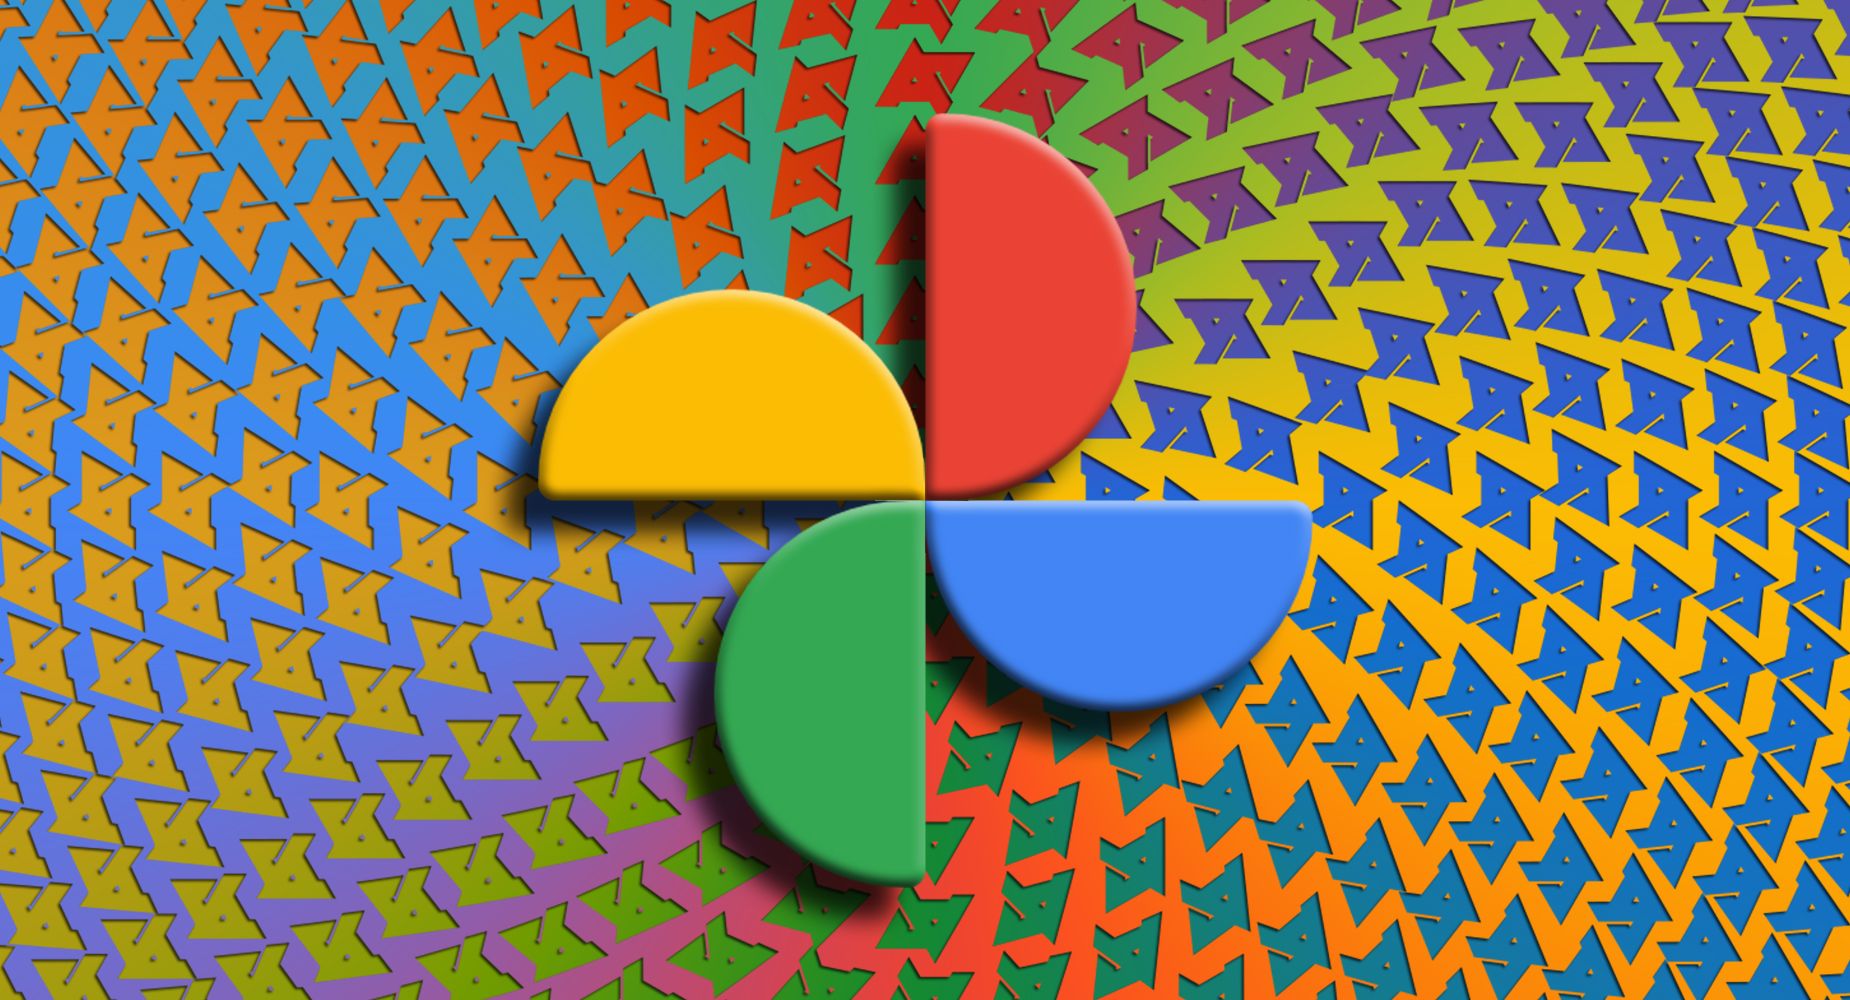 The Google Photos logo with a swirl of Android Police logos in the background